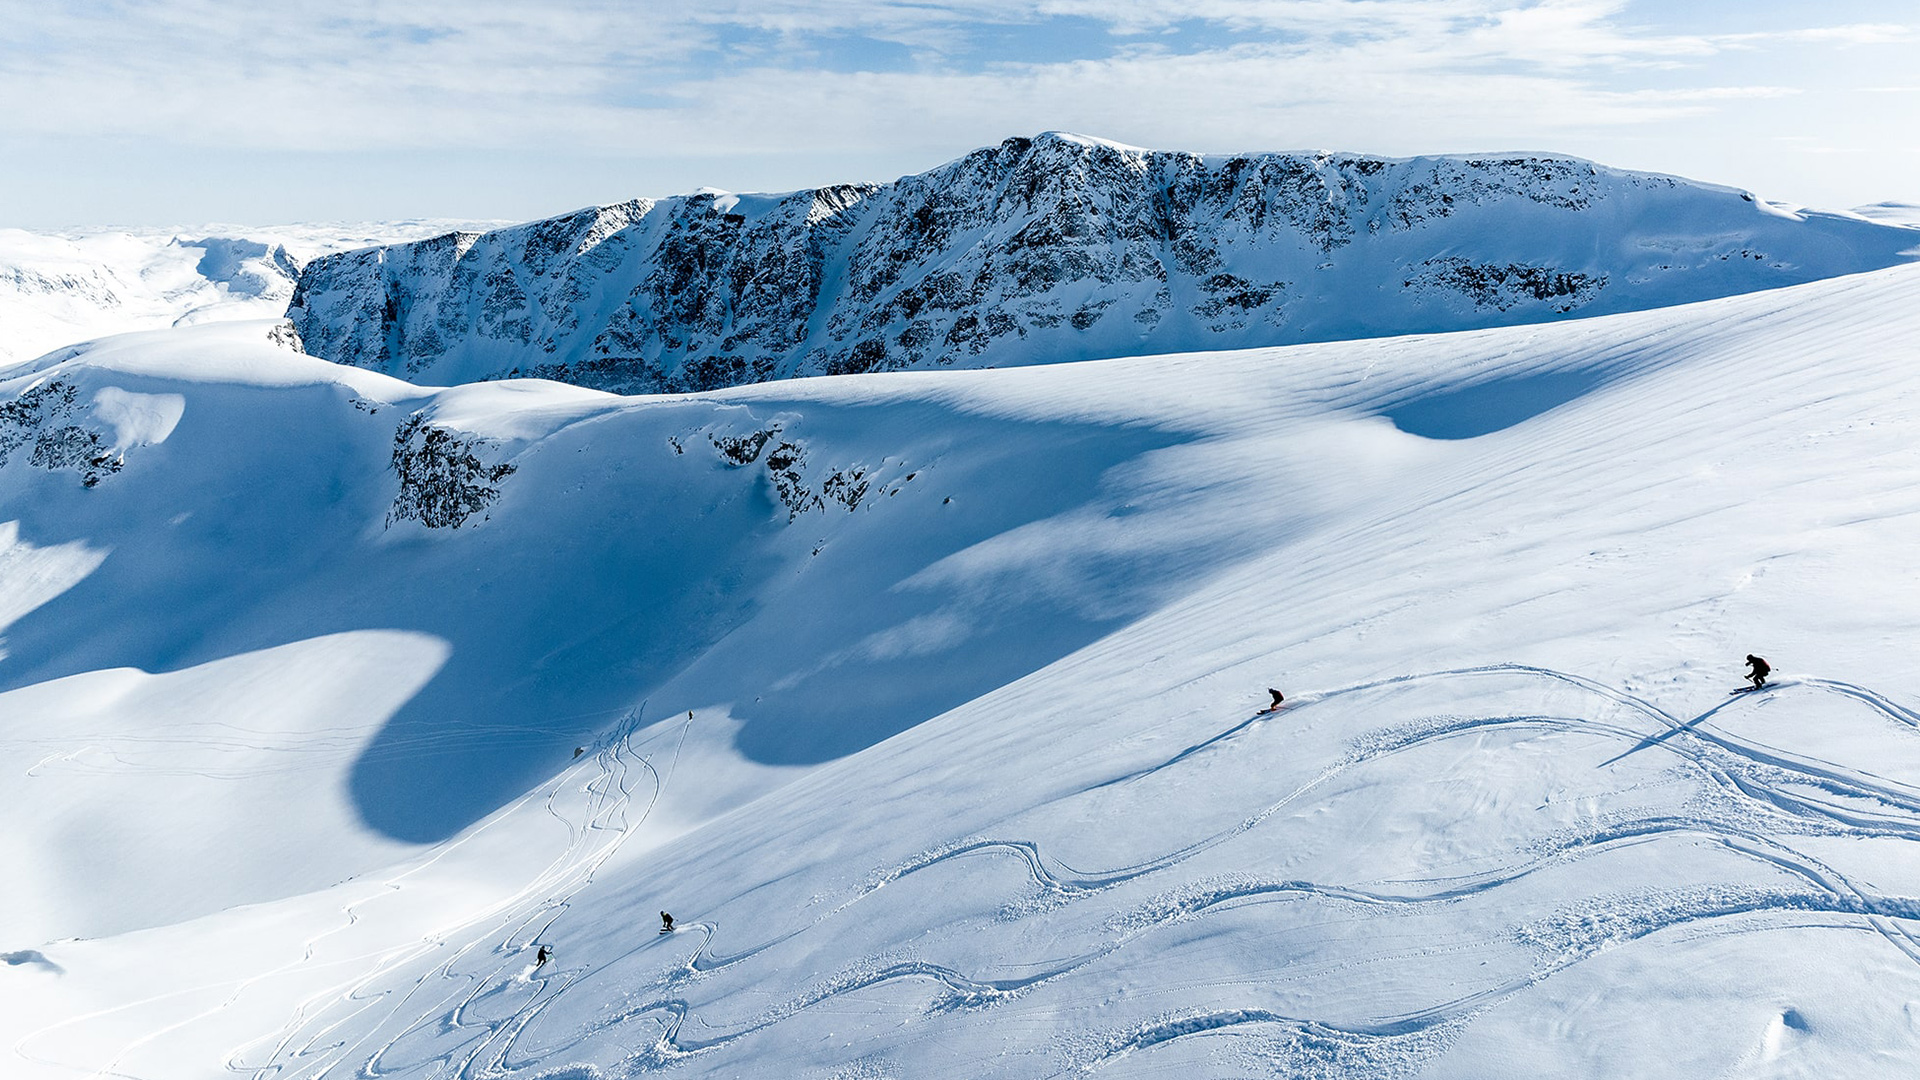 New! Experience Next Level Heli Skiing in Greenland with Bode Miller and Chris Davenport April 24-May 1, 2023 Aboard Nansen Explorer